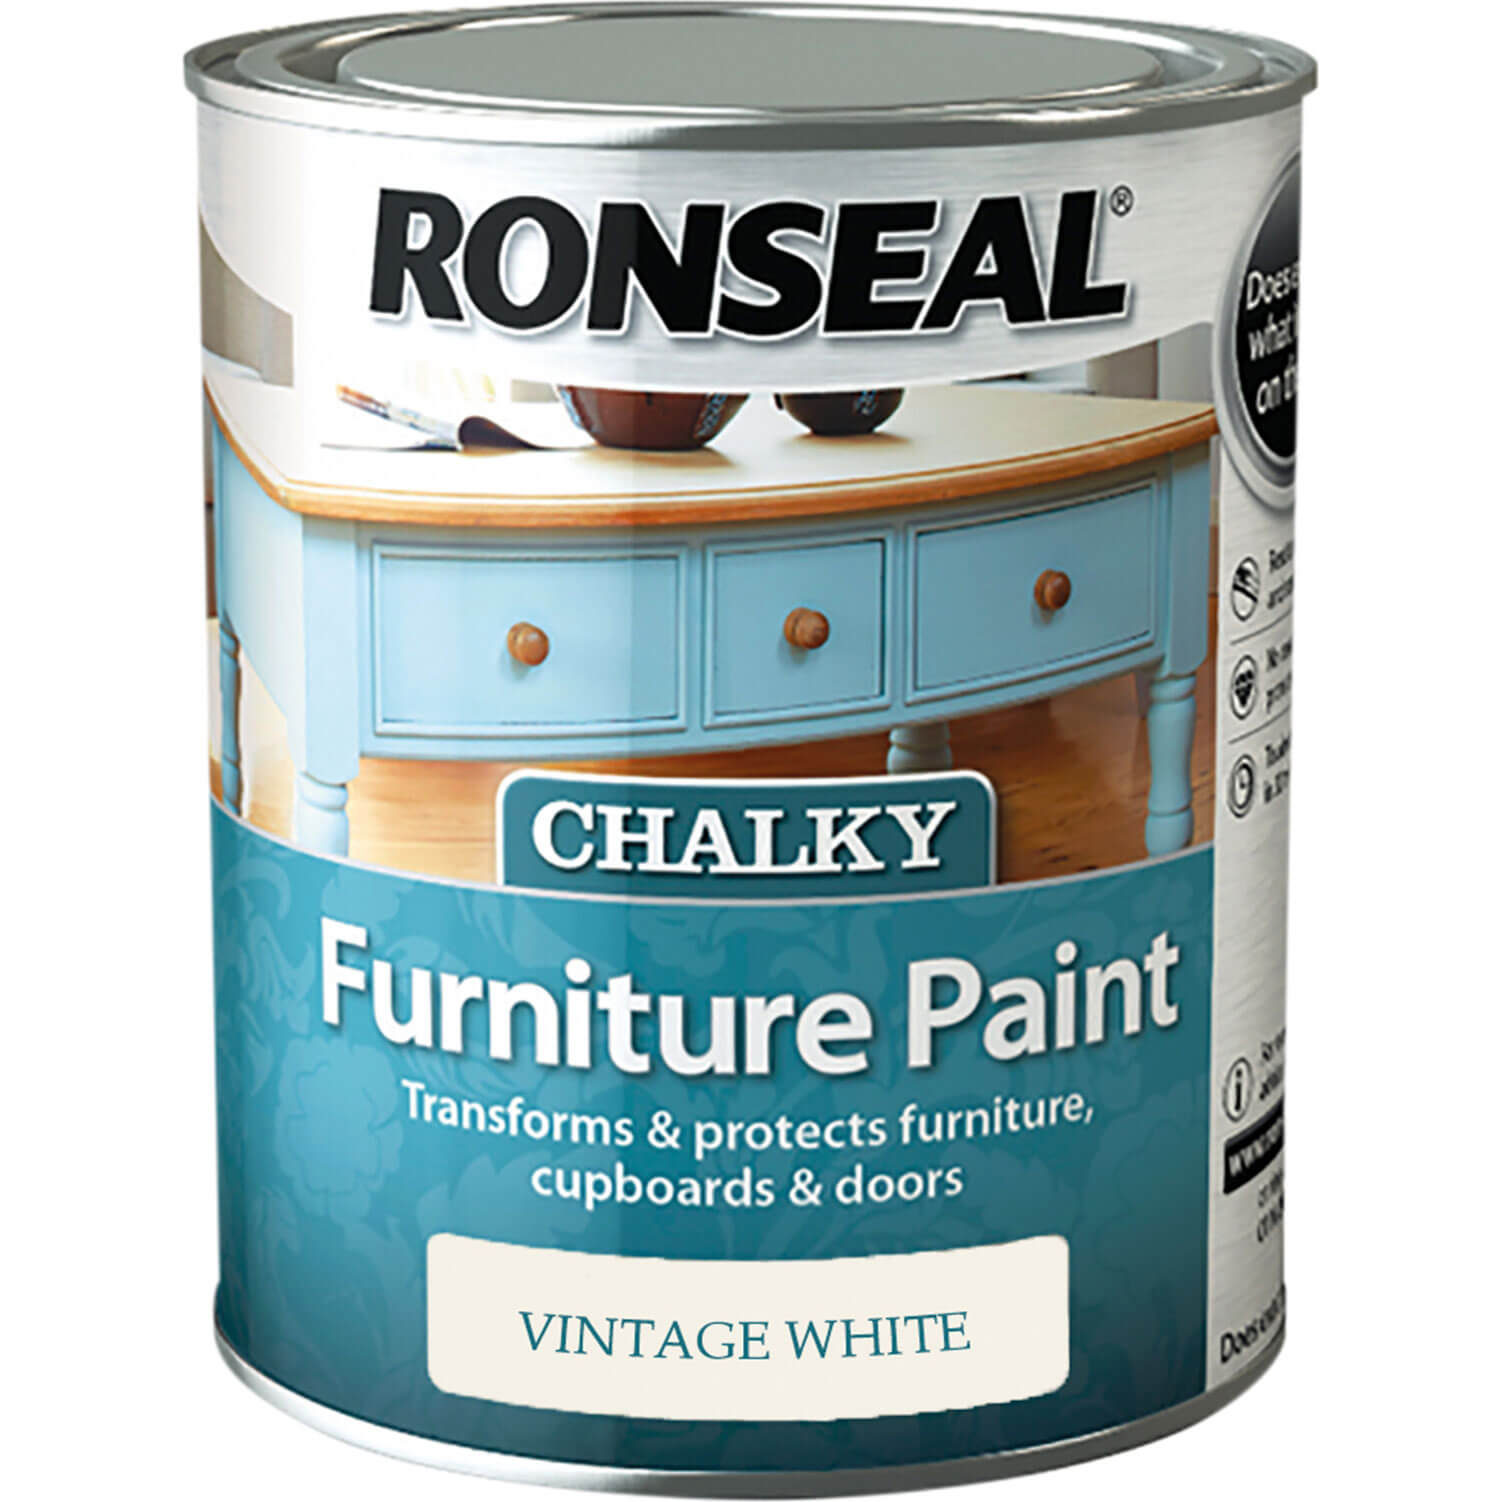 Image of Ronseal Chalky Furniture Paint Vintage White 750ml